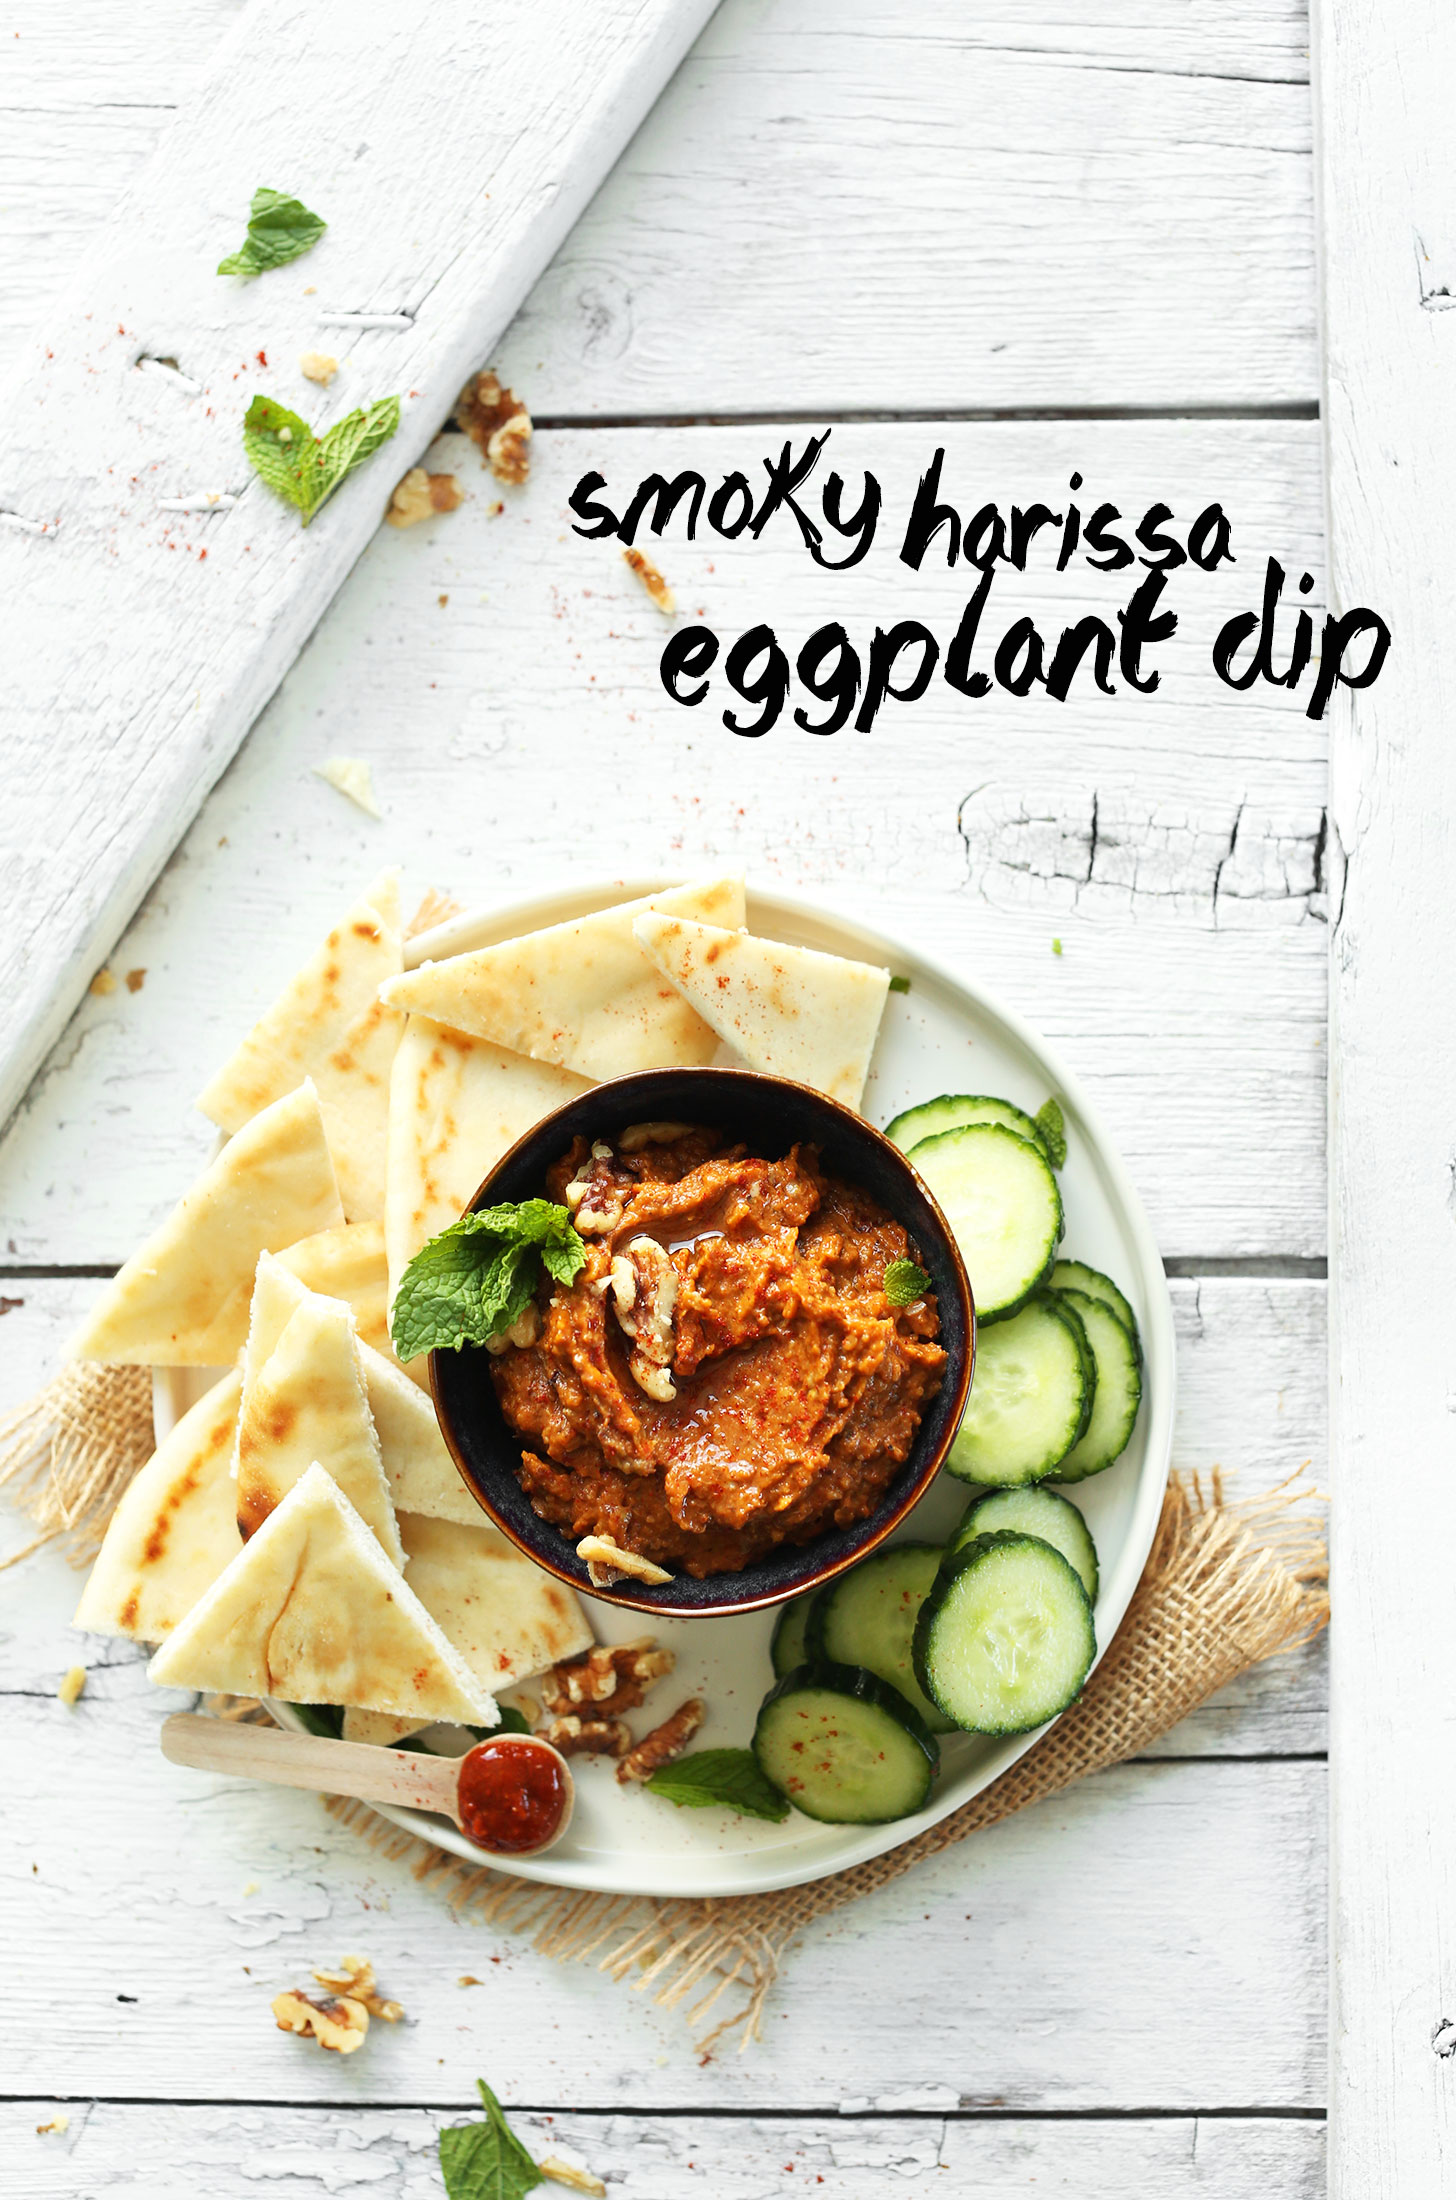 Creamy-eggplant-dip-with-smoky-spicy-harissa-paste-the-perfect-snack-or-appetizer-vegan-glutenfree-recipe-healthy